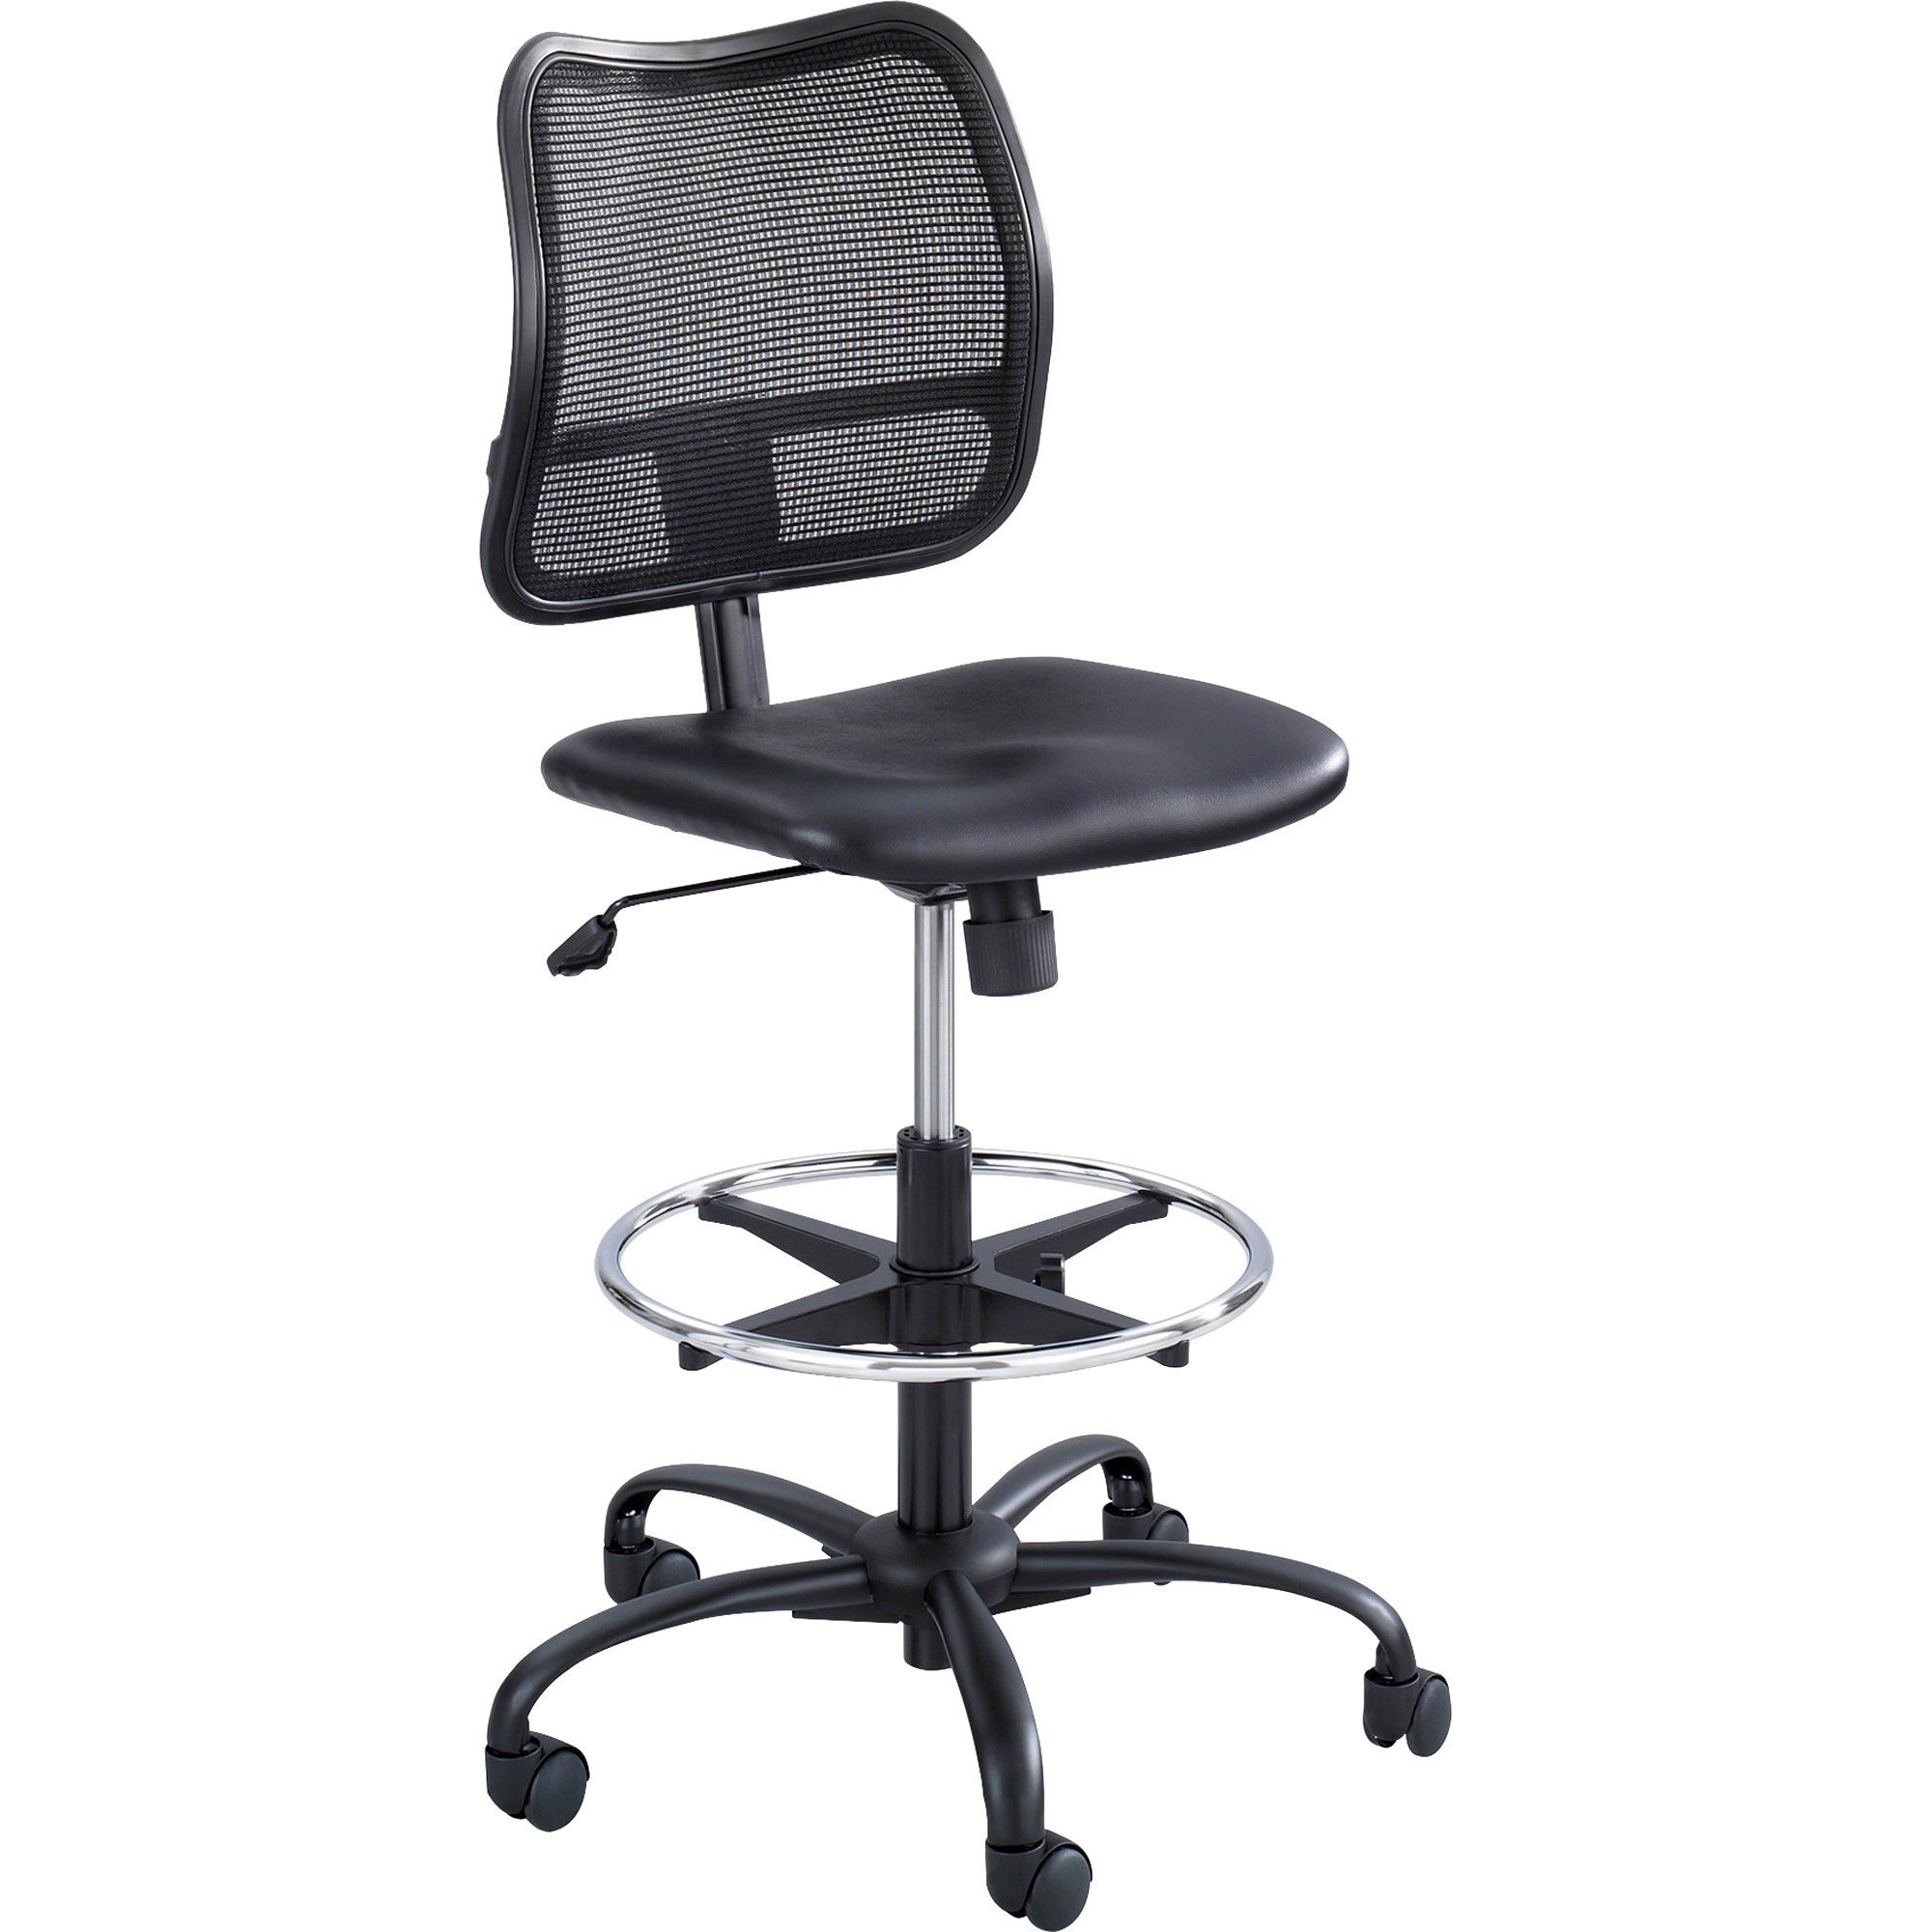 safco vue intensive use mesh task office chair in black